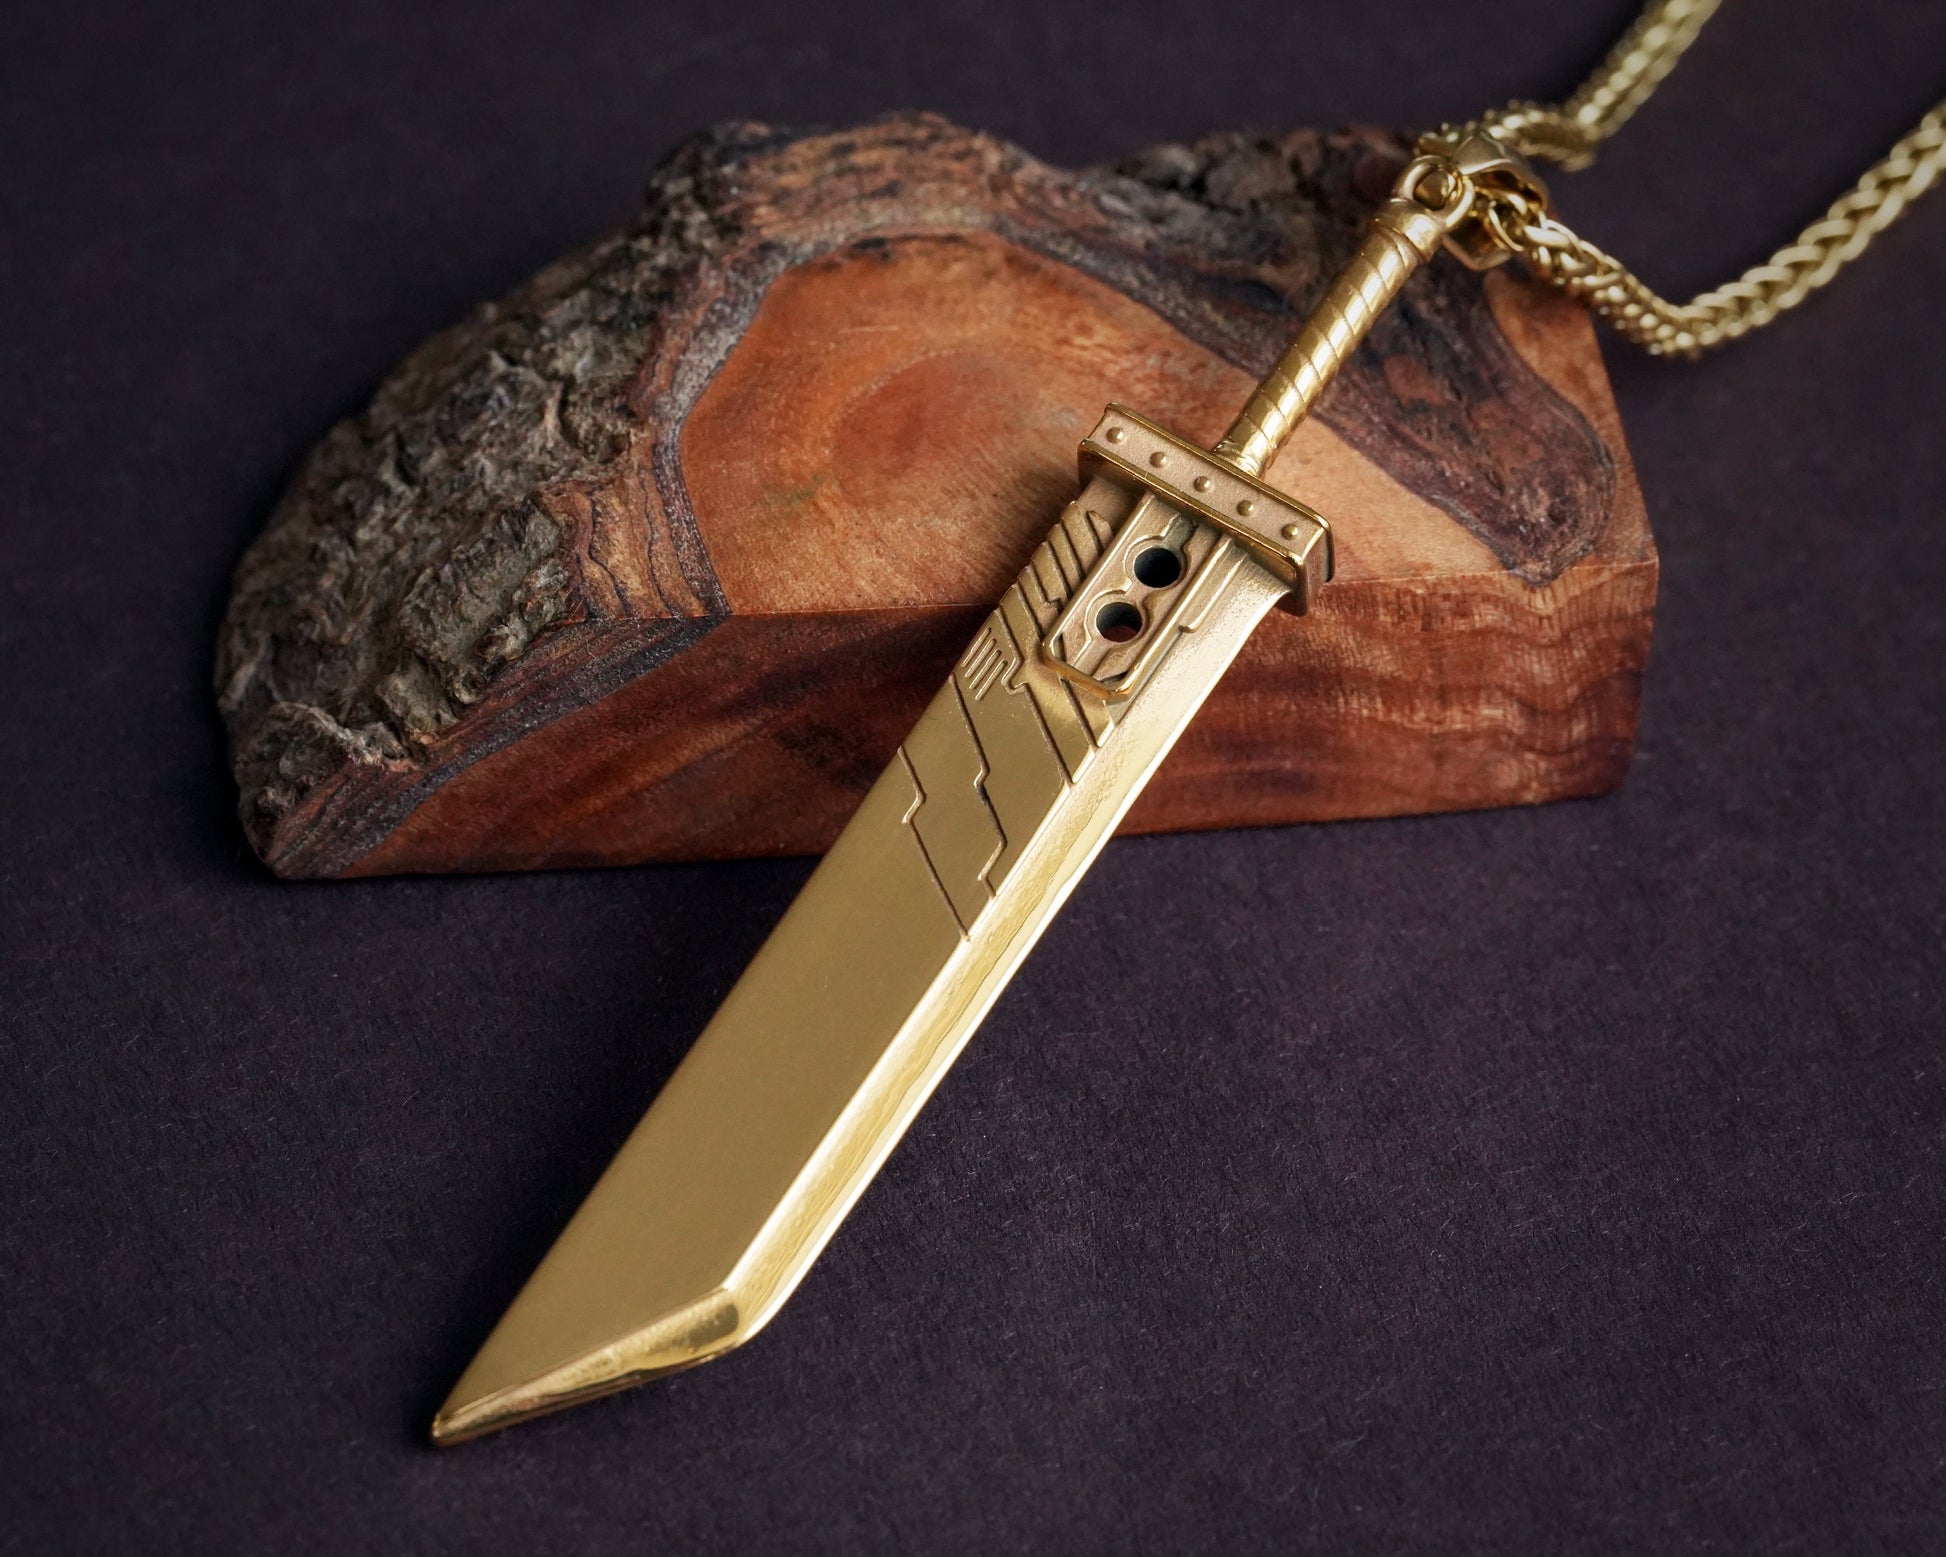 Extra Large Golden Silver Final VII Cloud Buster Sword Fantasy Necklace Pendant Jewelry Keychain - Baldur Jewelry